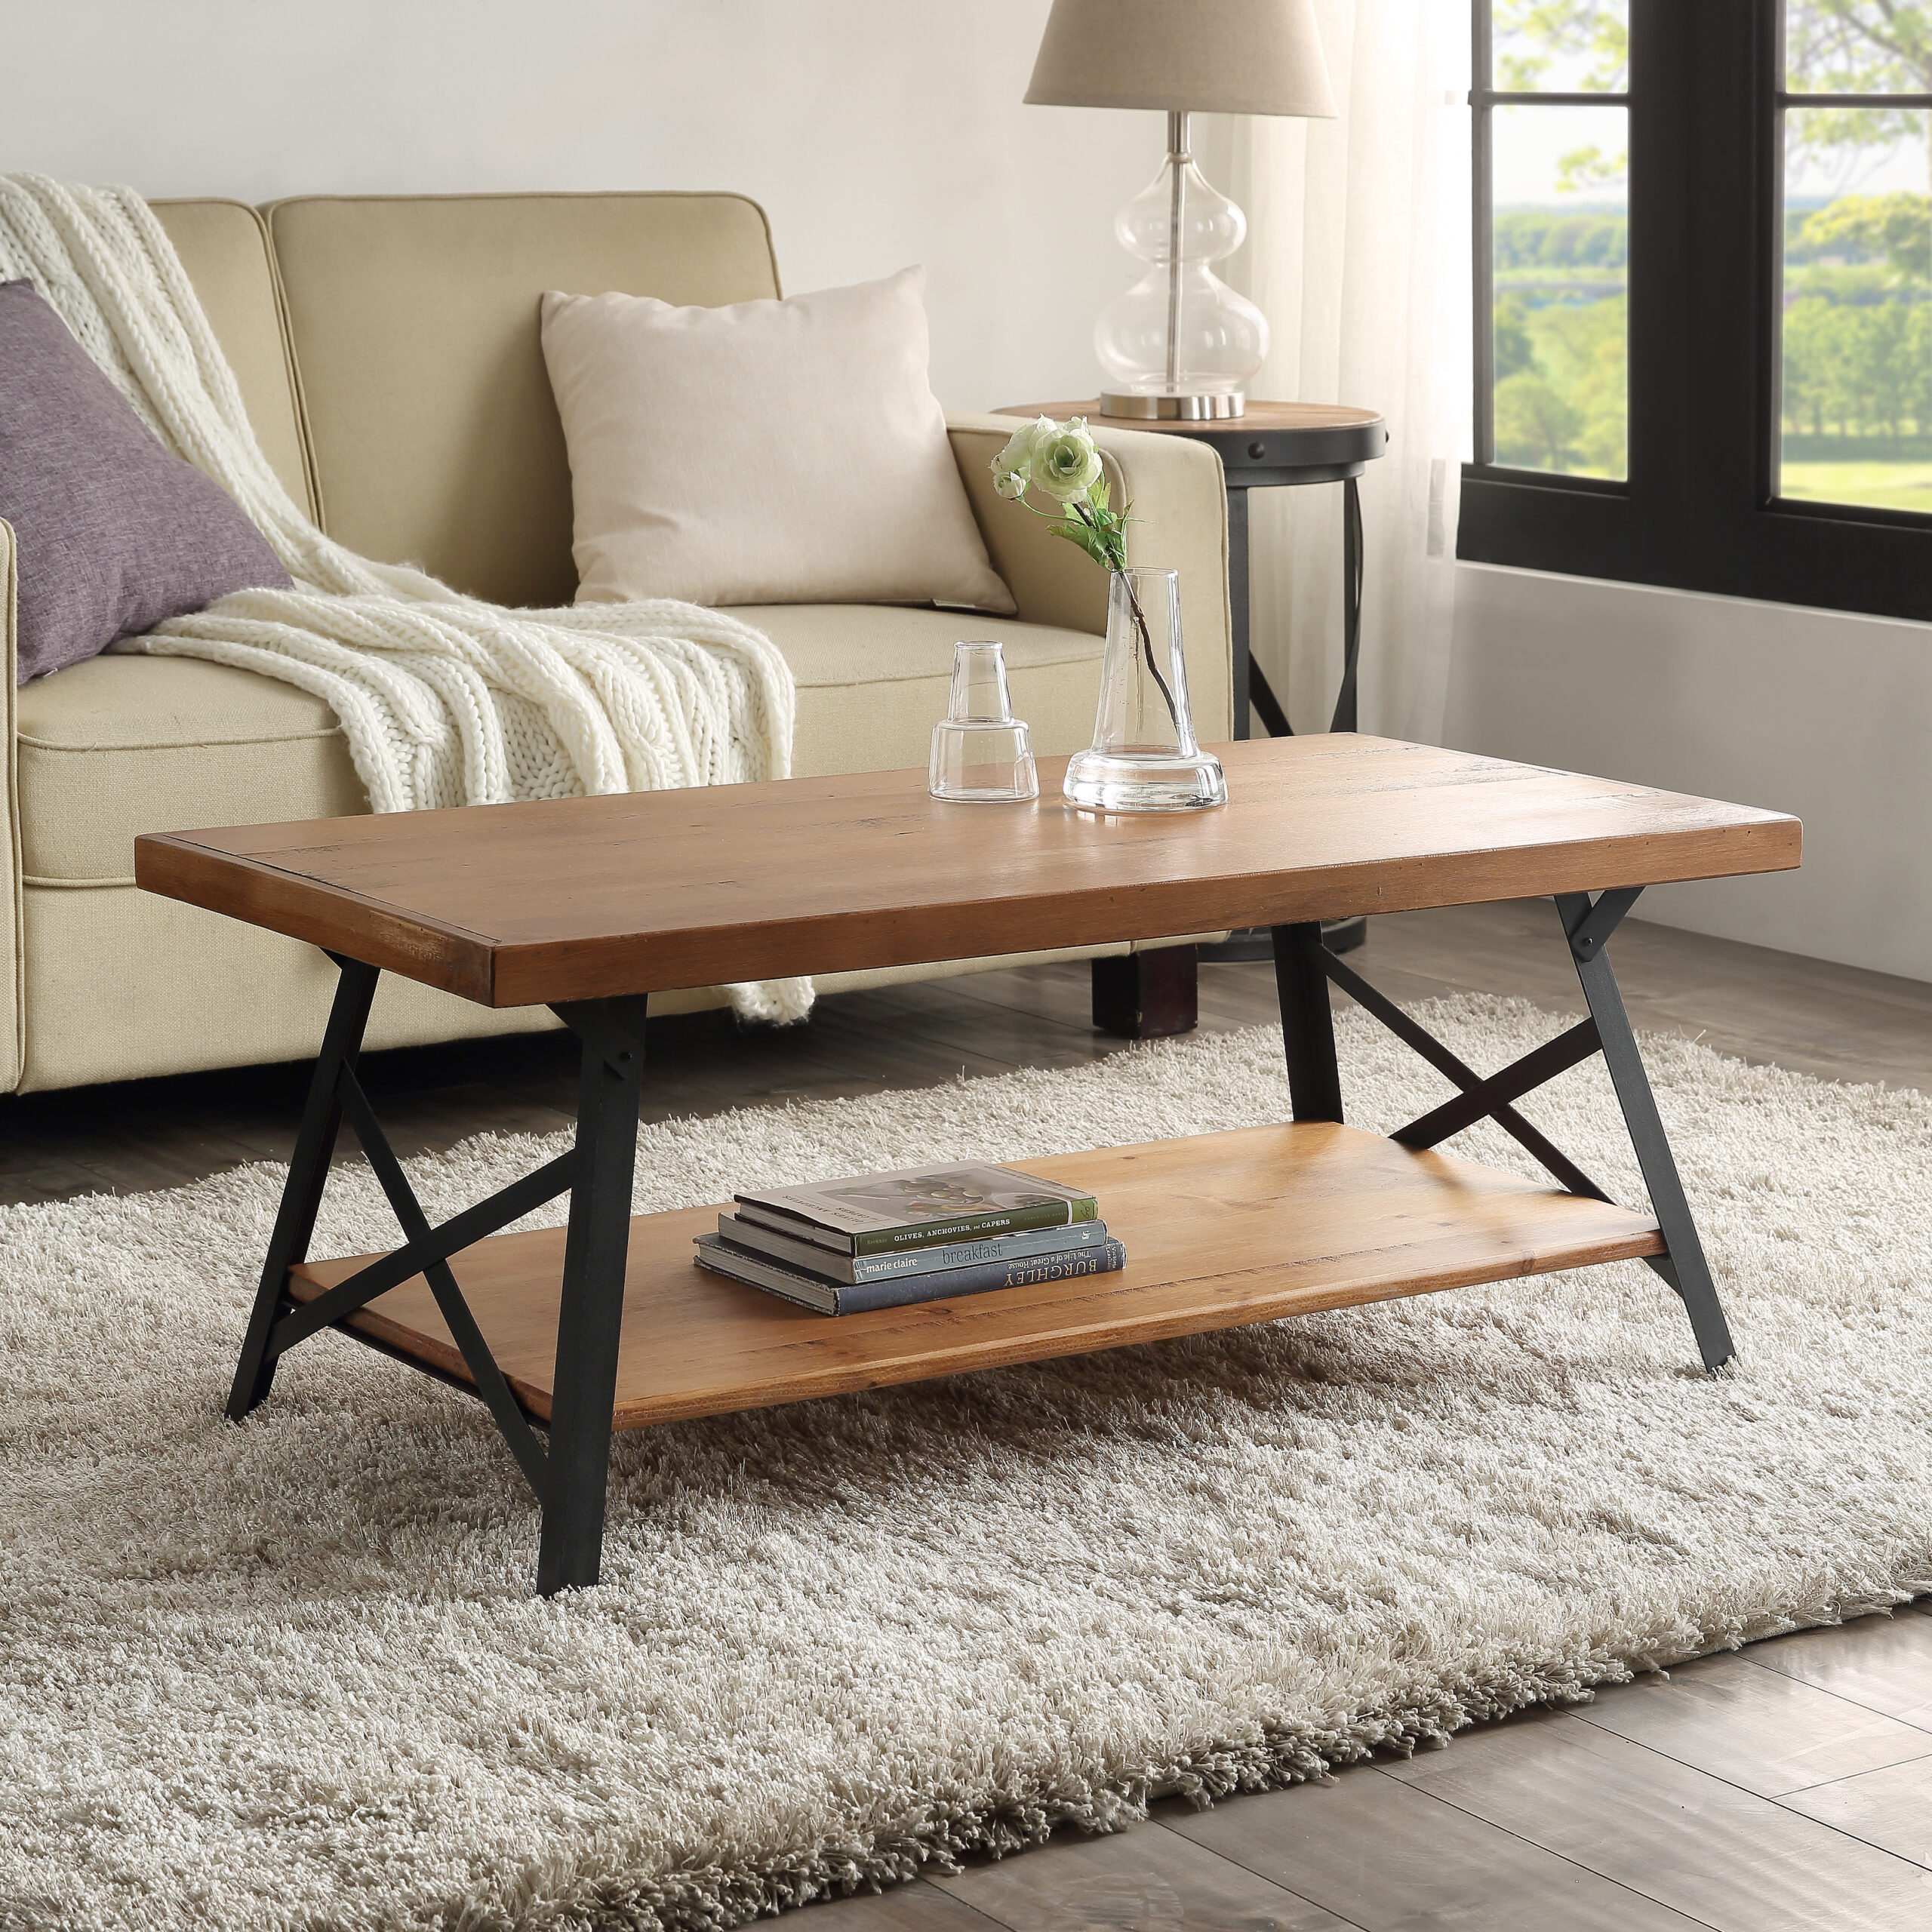 Solid Wood Coffee Table With Metal Legs